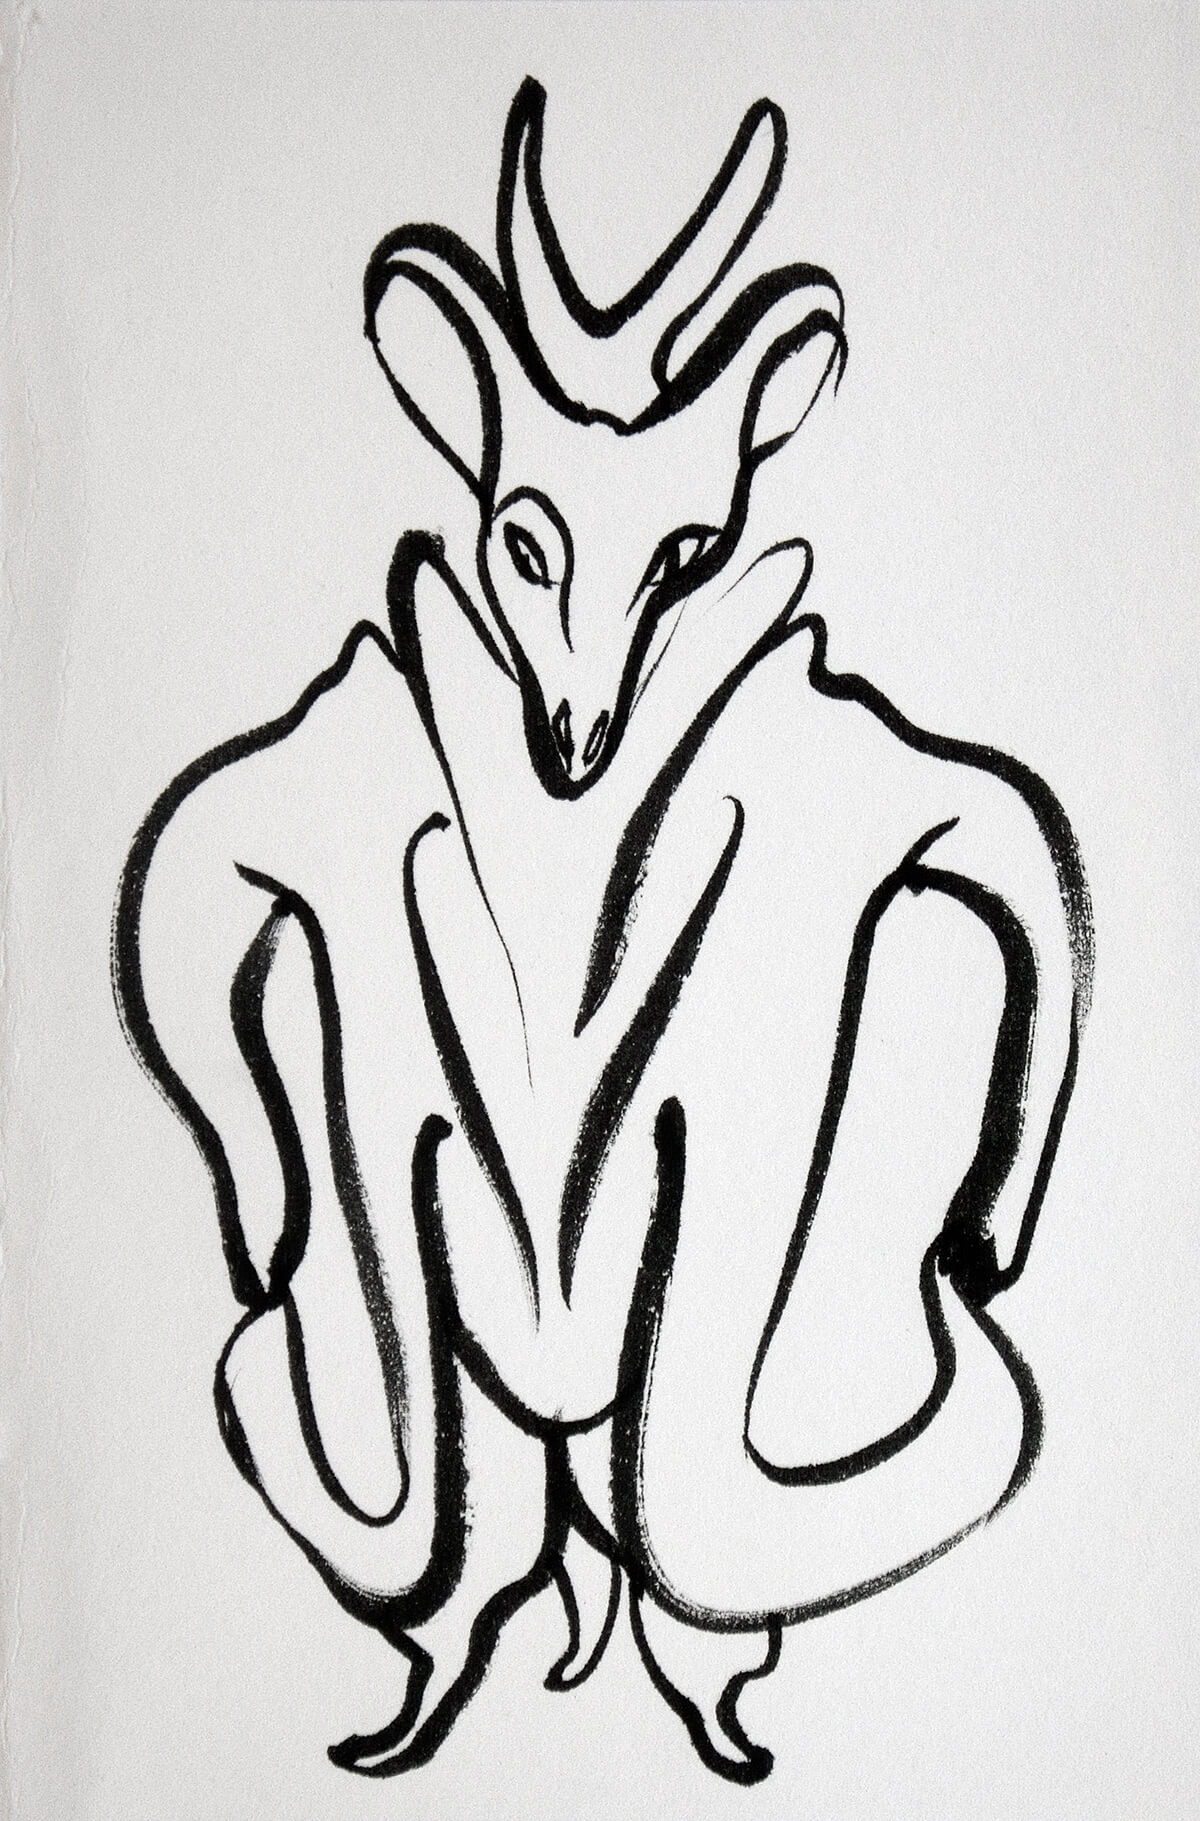 untitled (deer person), 16 x 11 cm, ink on paper, 2015